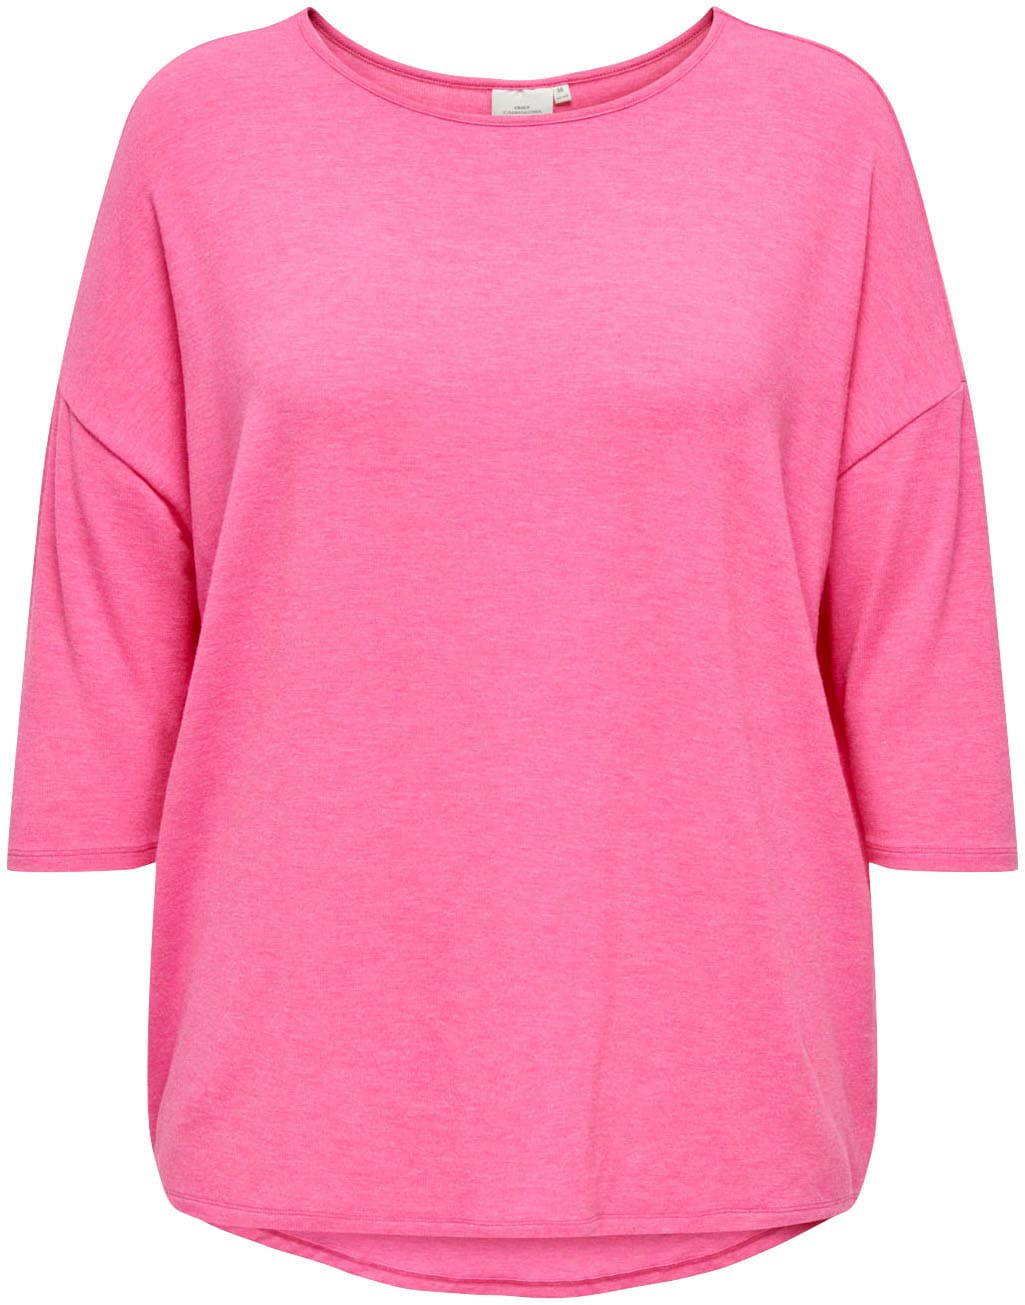 ONLY CARMAKOMA 3/4-Arm-Shirt »CARLAMOUR 3/4 TOP JRS NOOS« kaufen bei OTTO | V-Shirts